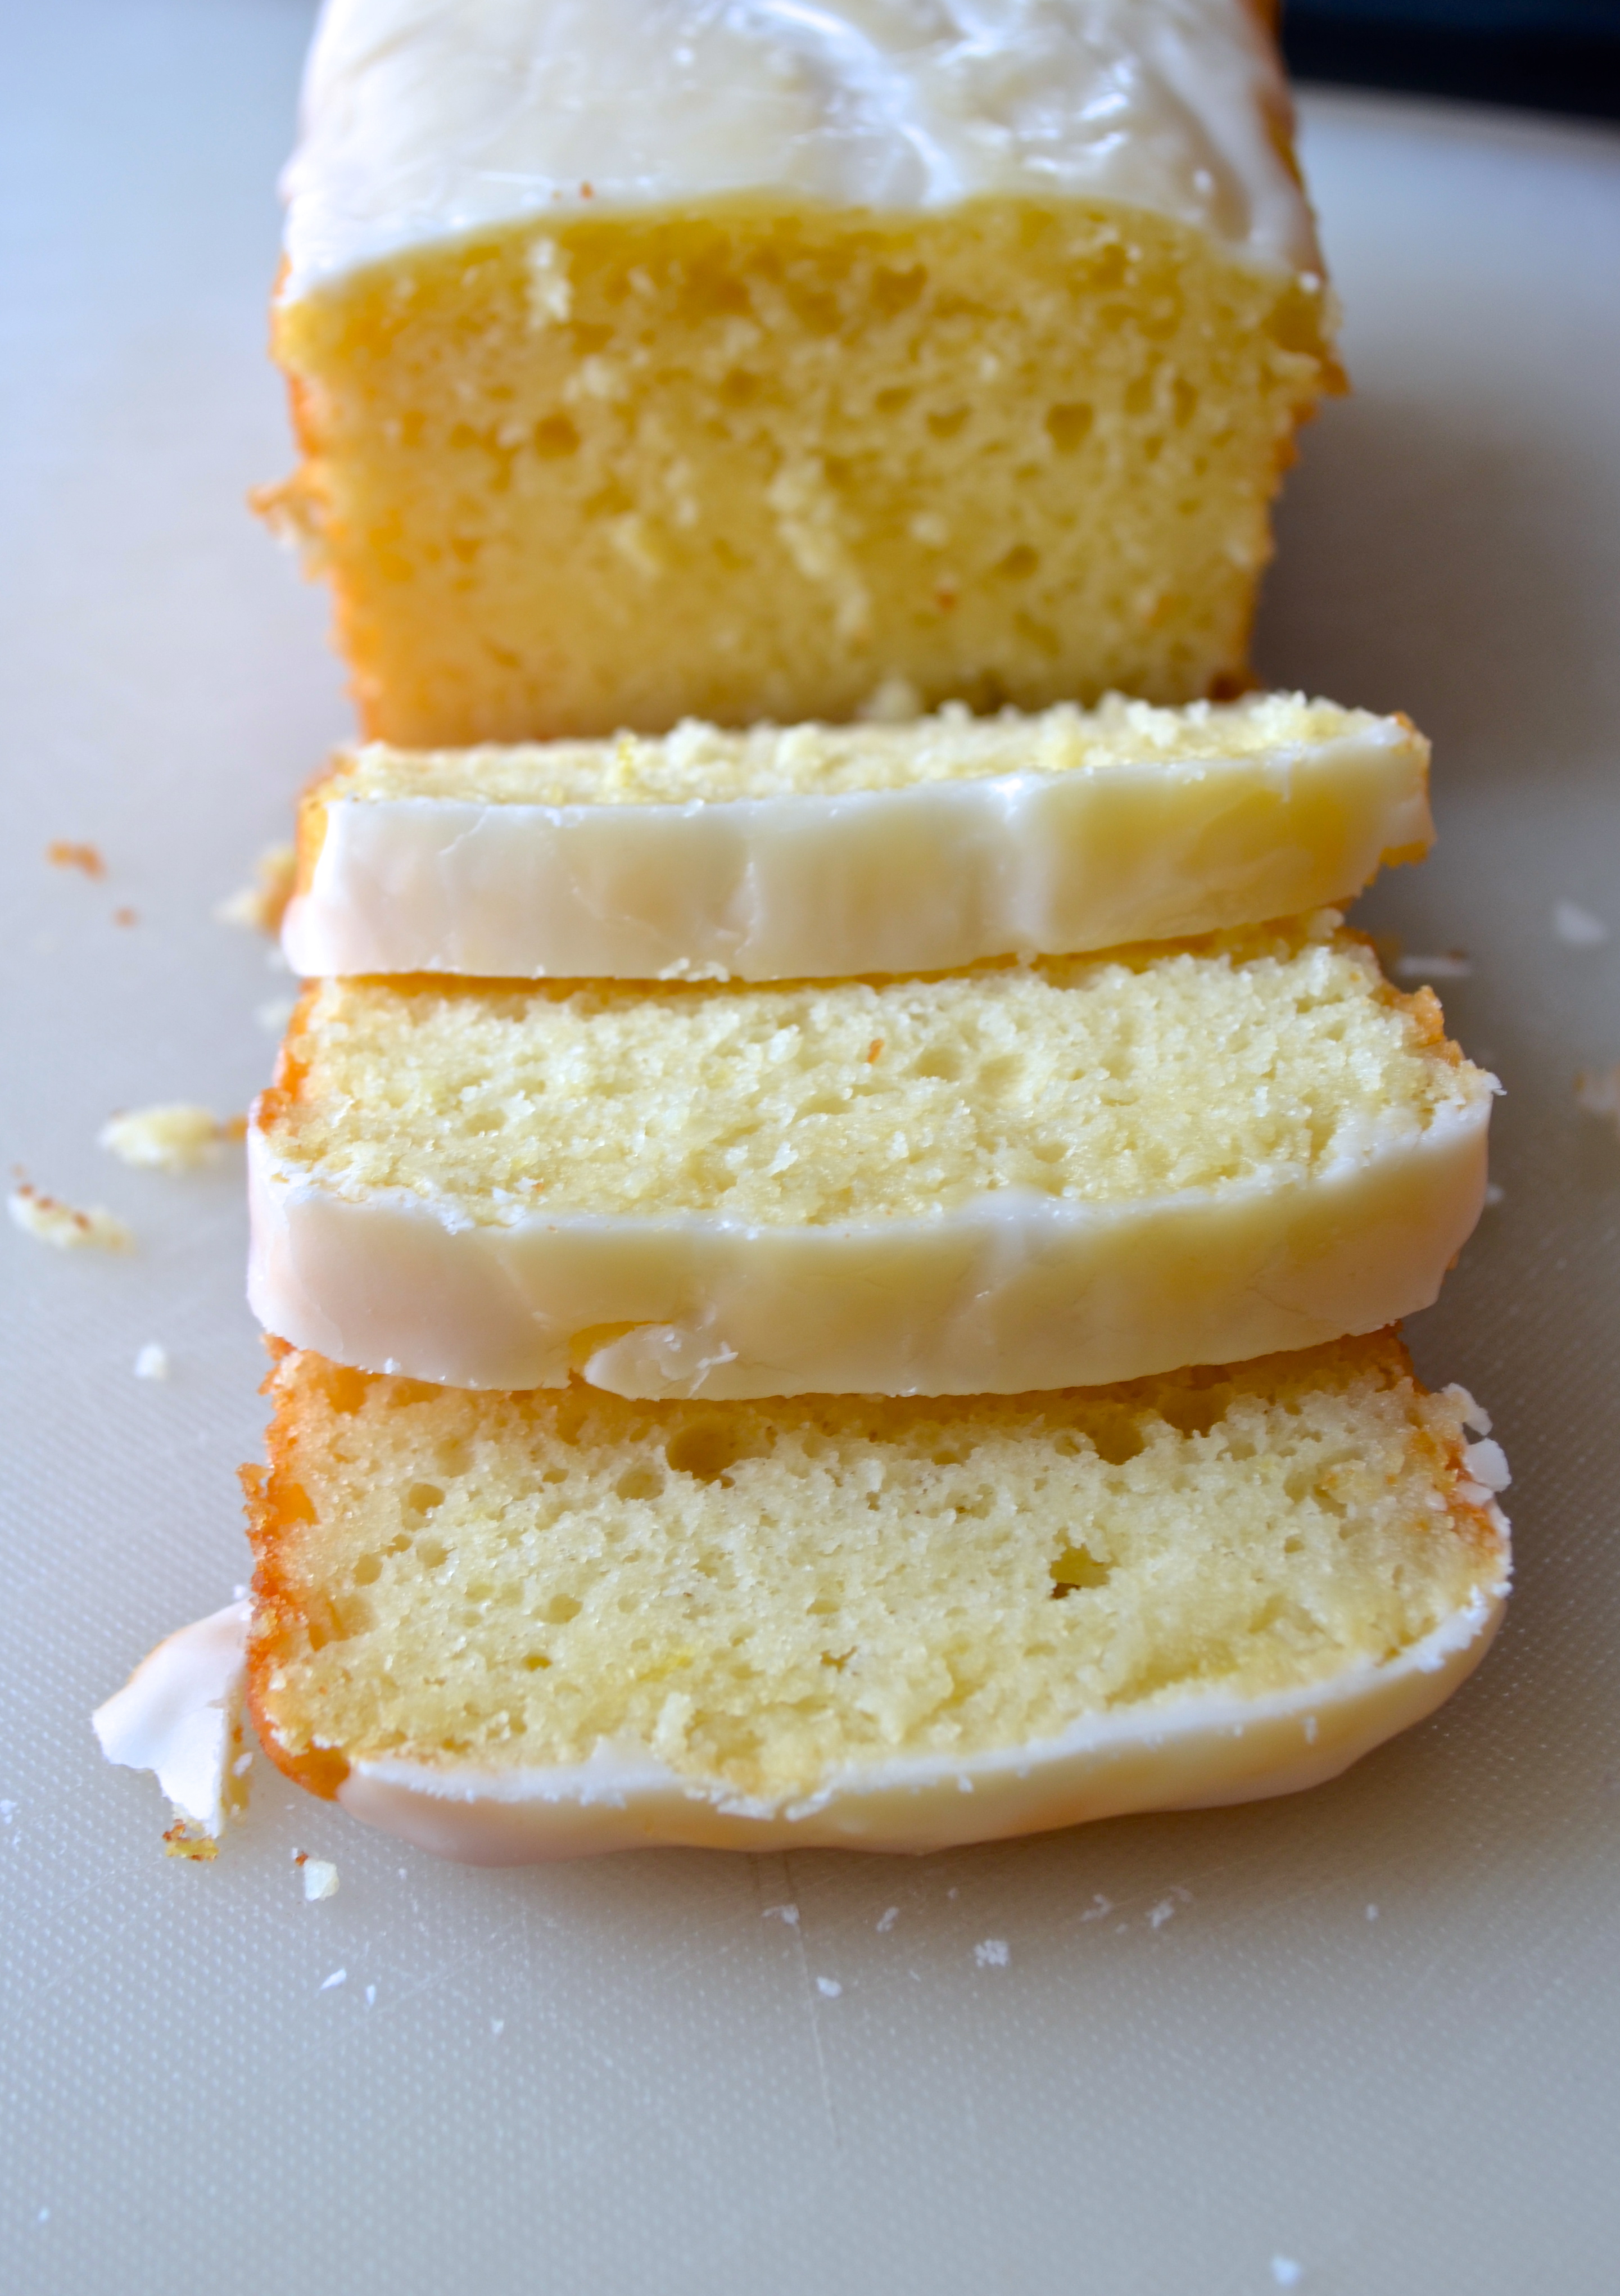 What is a good recipe for lemon loaf cake?